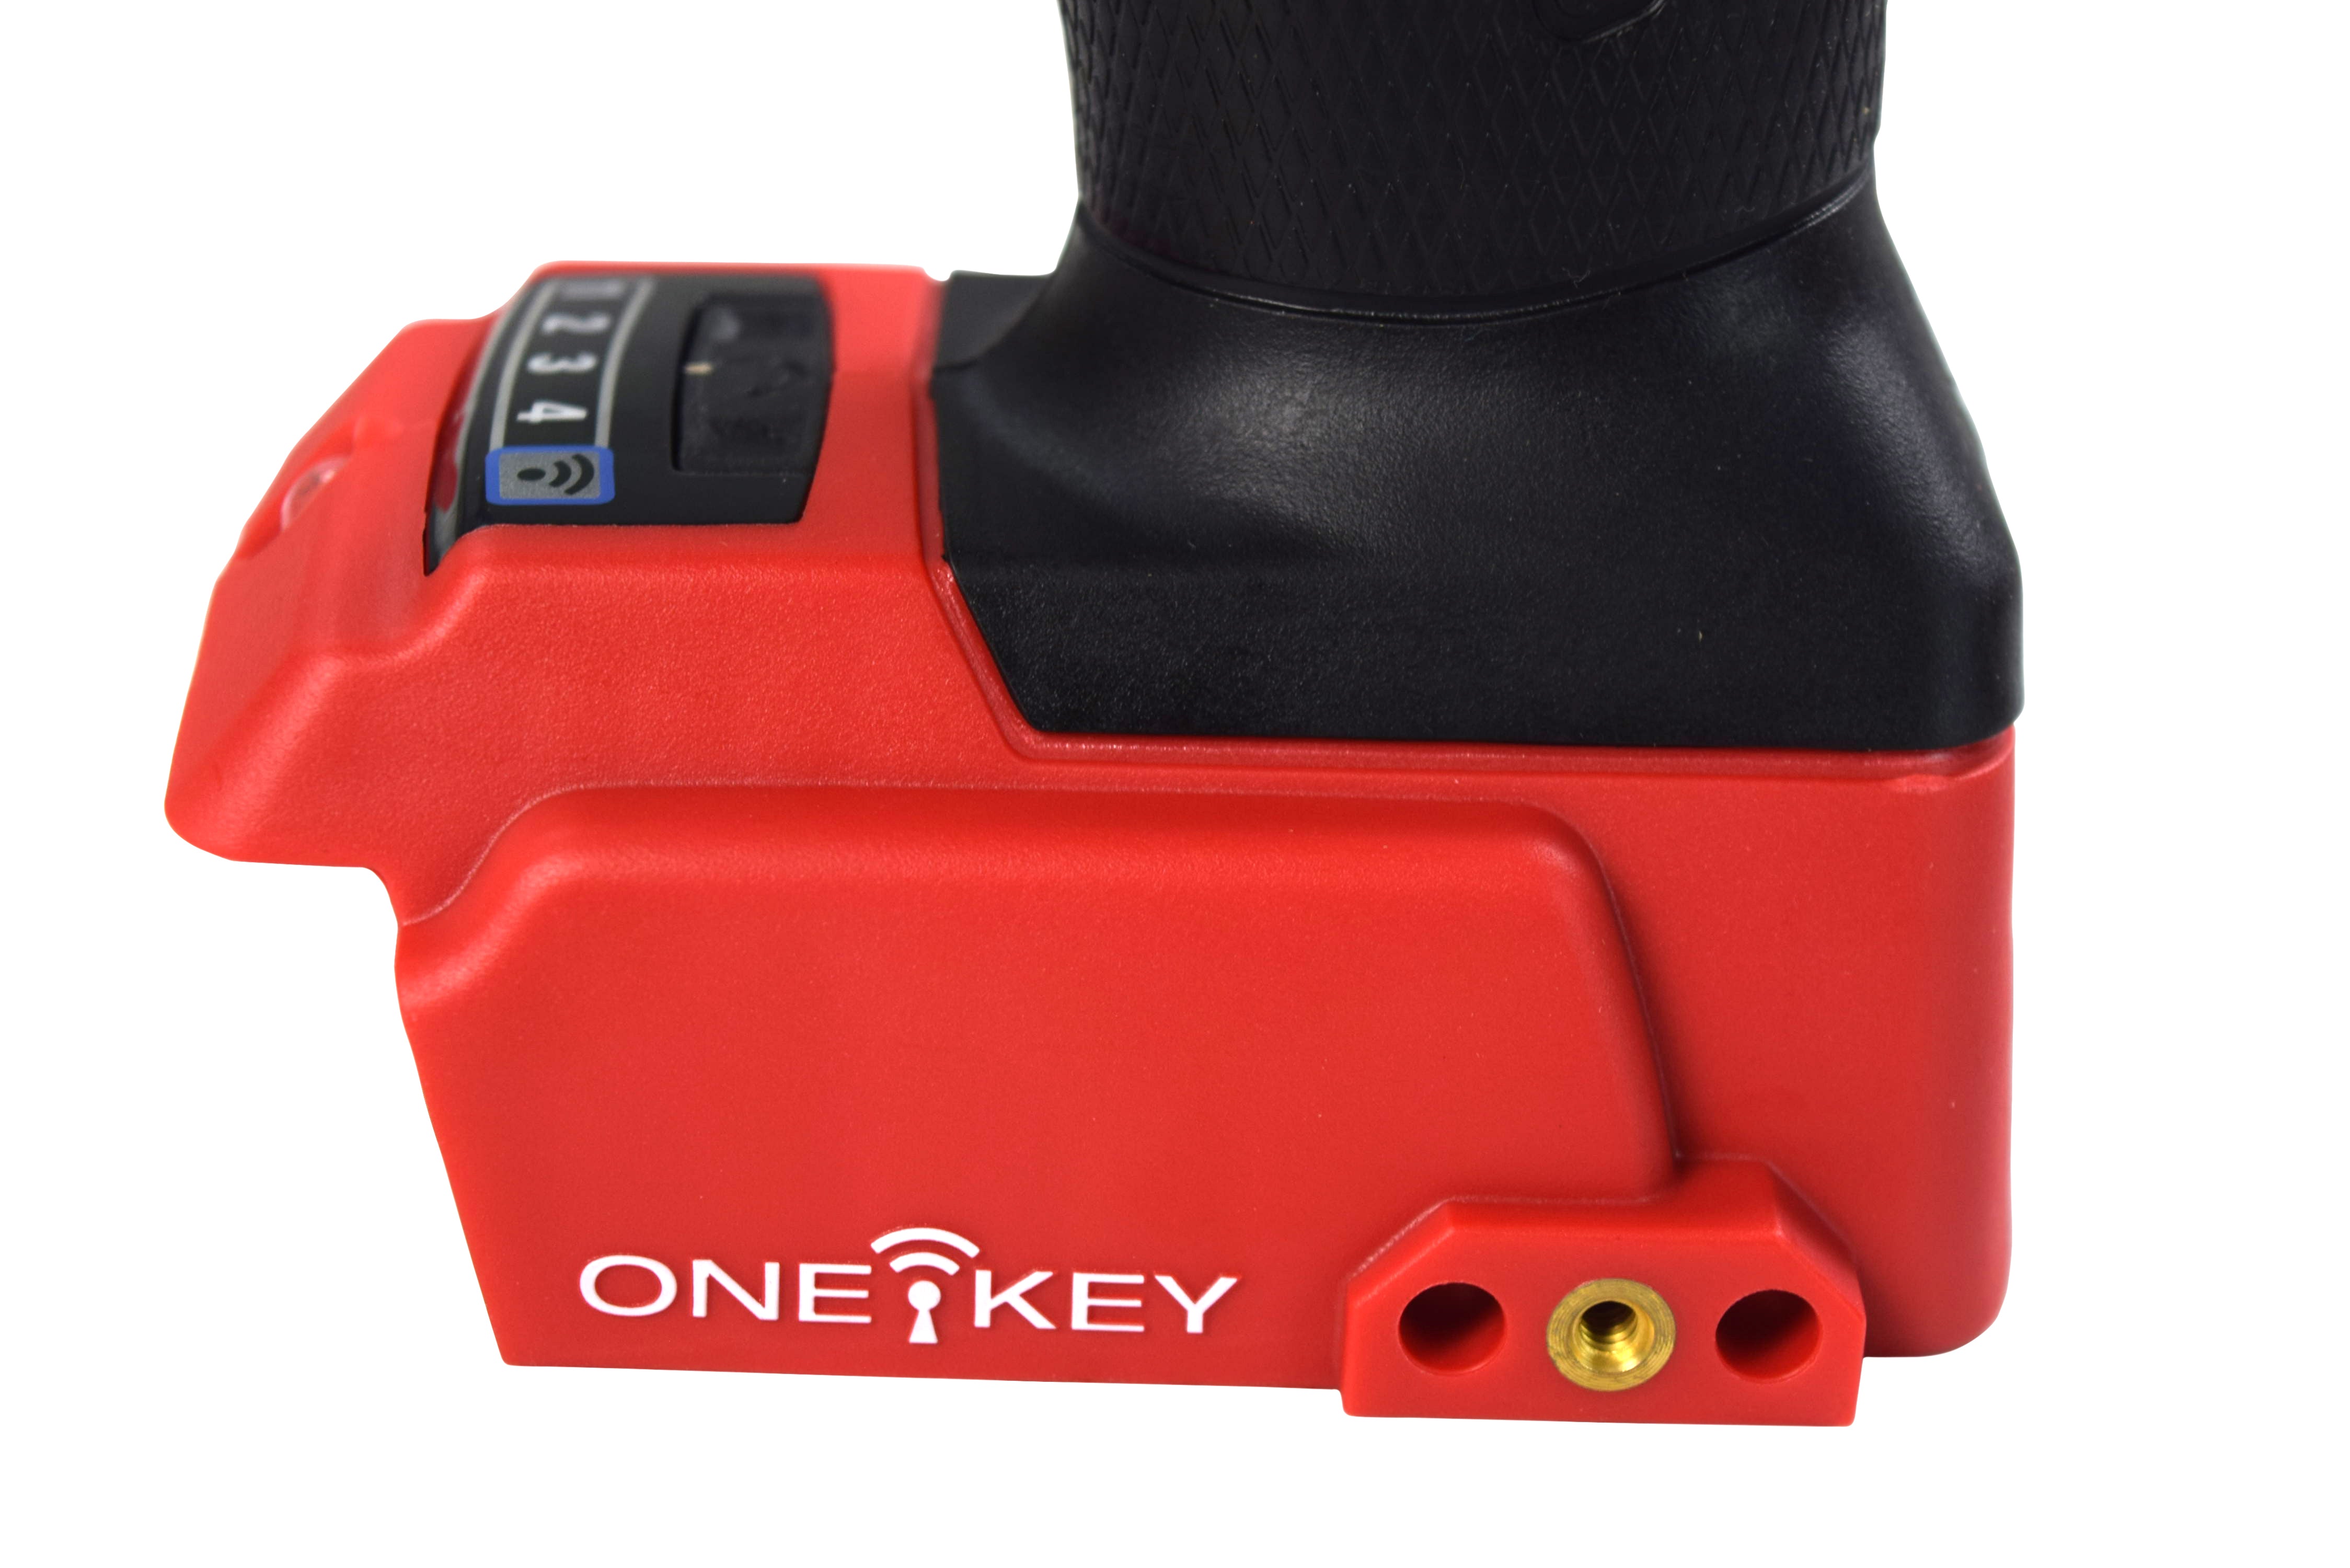 Milwaukee 2864-20 M18 FUEL w/ ONE-KEY High Torque Impact Wrench 3/4" Friction Ring - Bare Tool